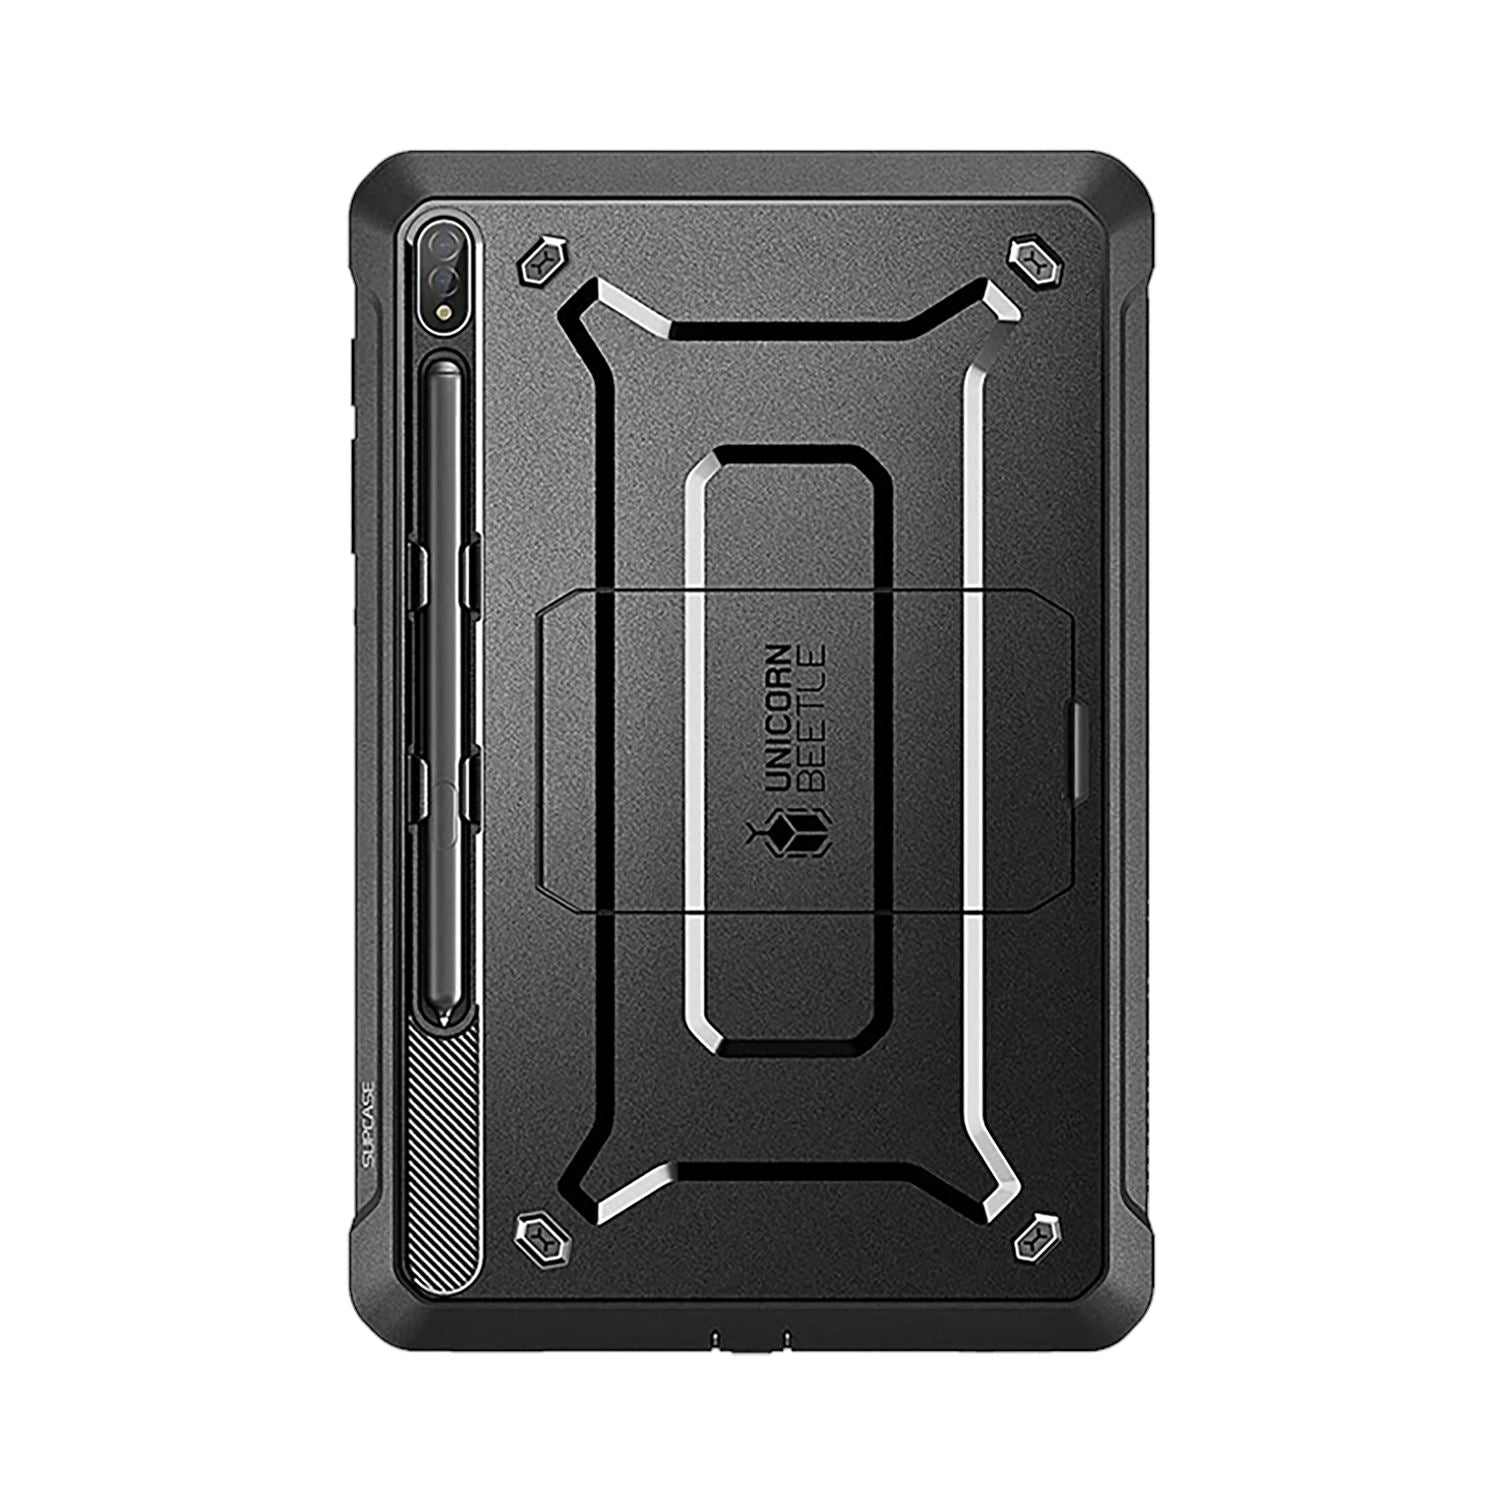 Supcase UB Pro Series Full-Body Rugged Case with Kickstand for Samsung Galaxy Tab S7+(2020)12.4'', Black Default Supcase 